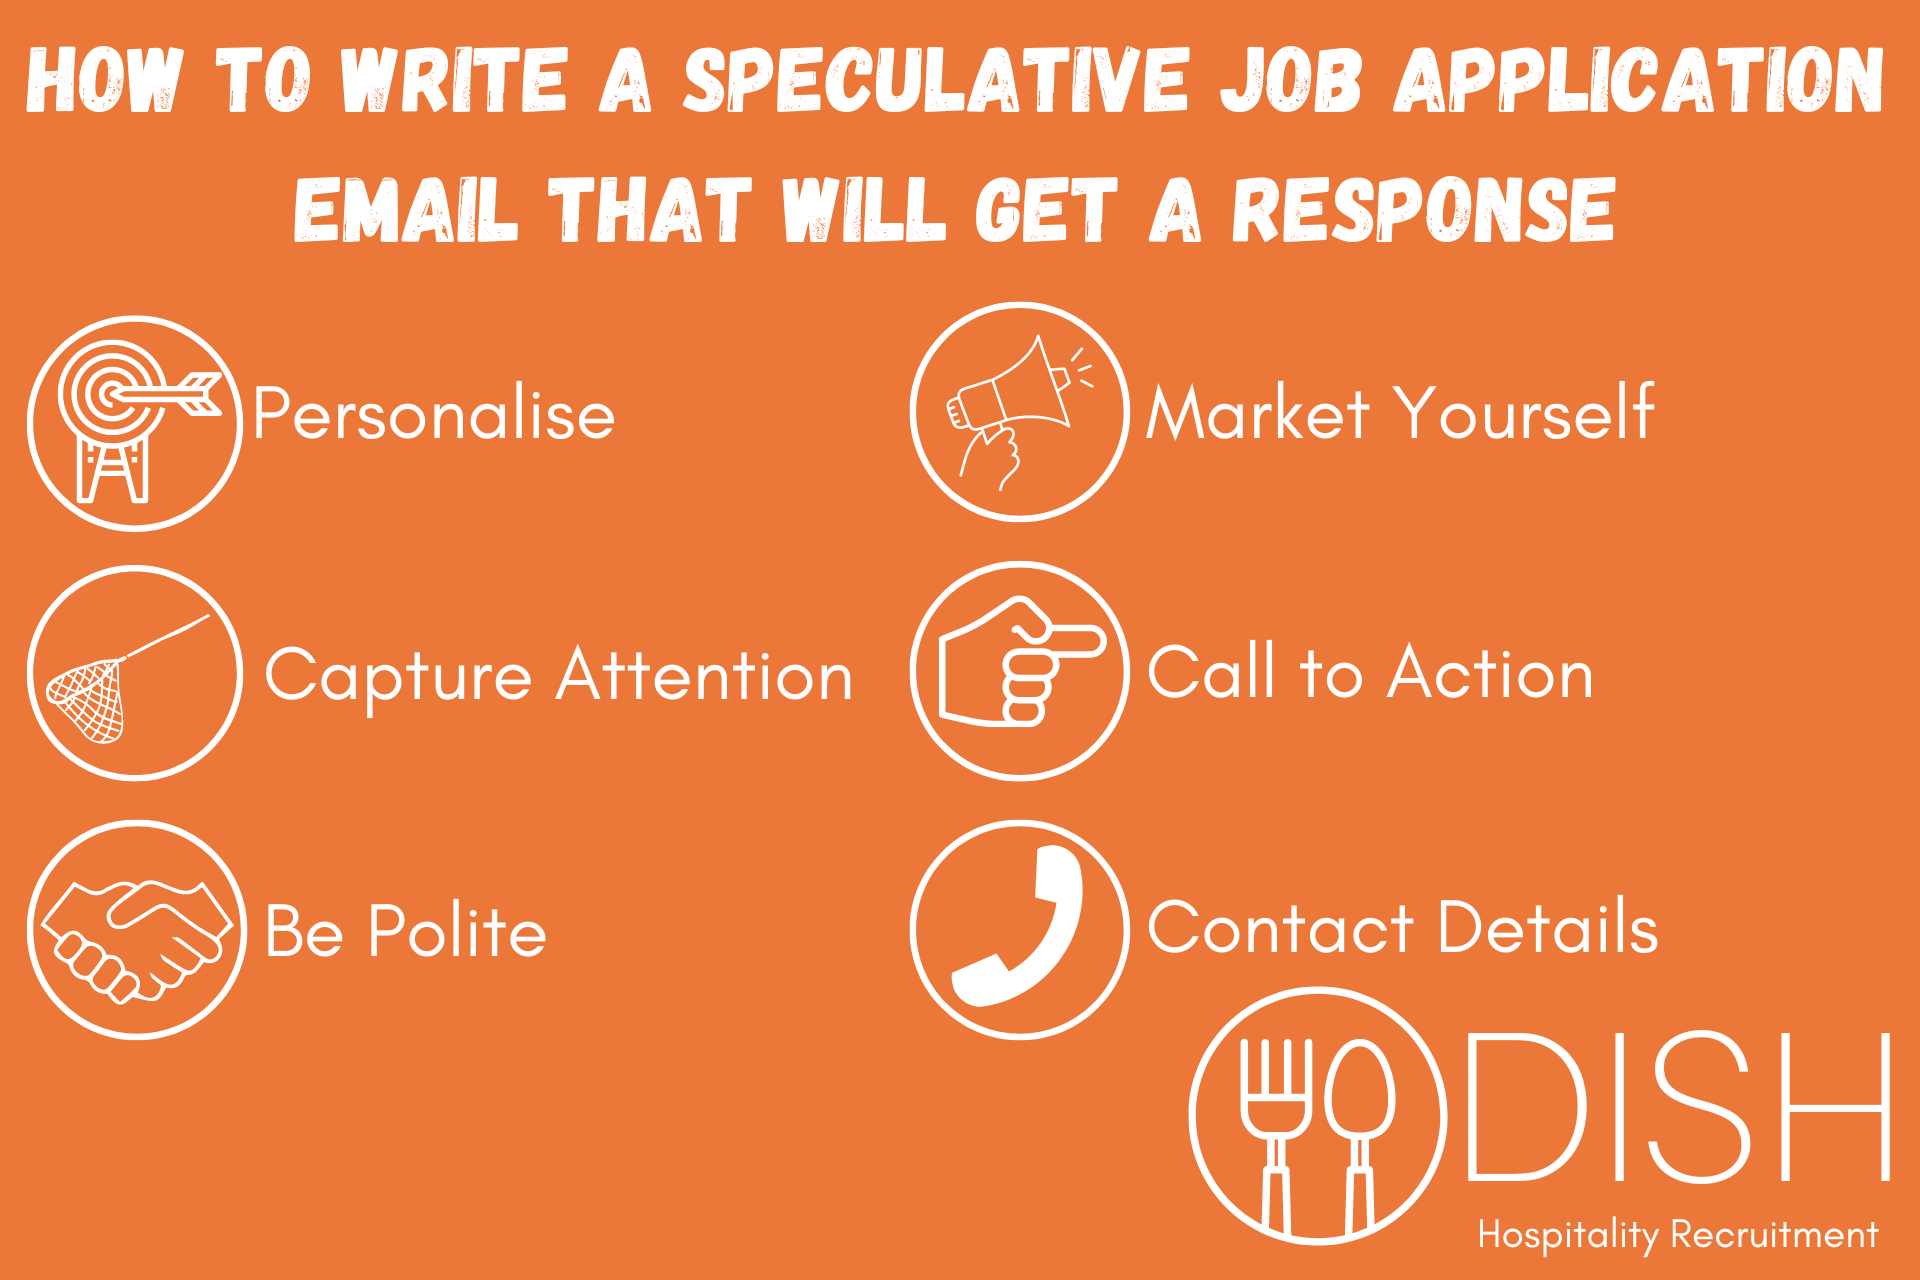 How to Write a Speculative Job Application Email That Will Get a Response